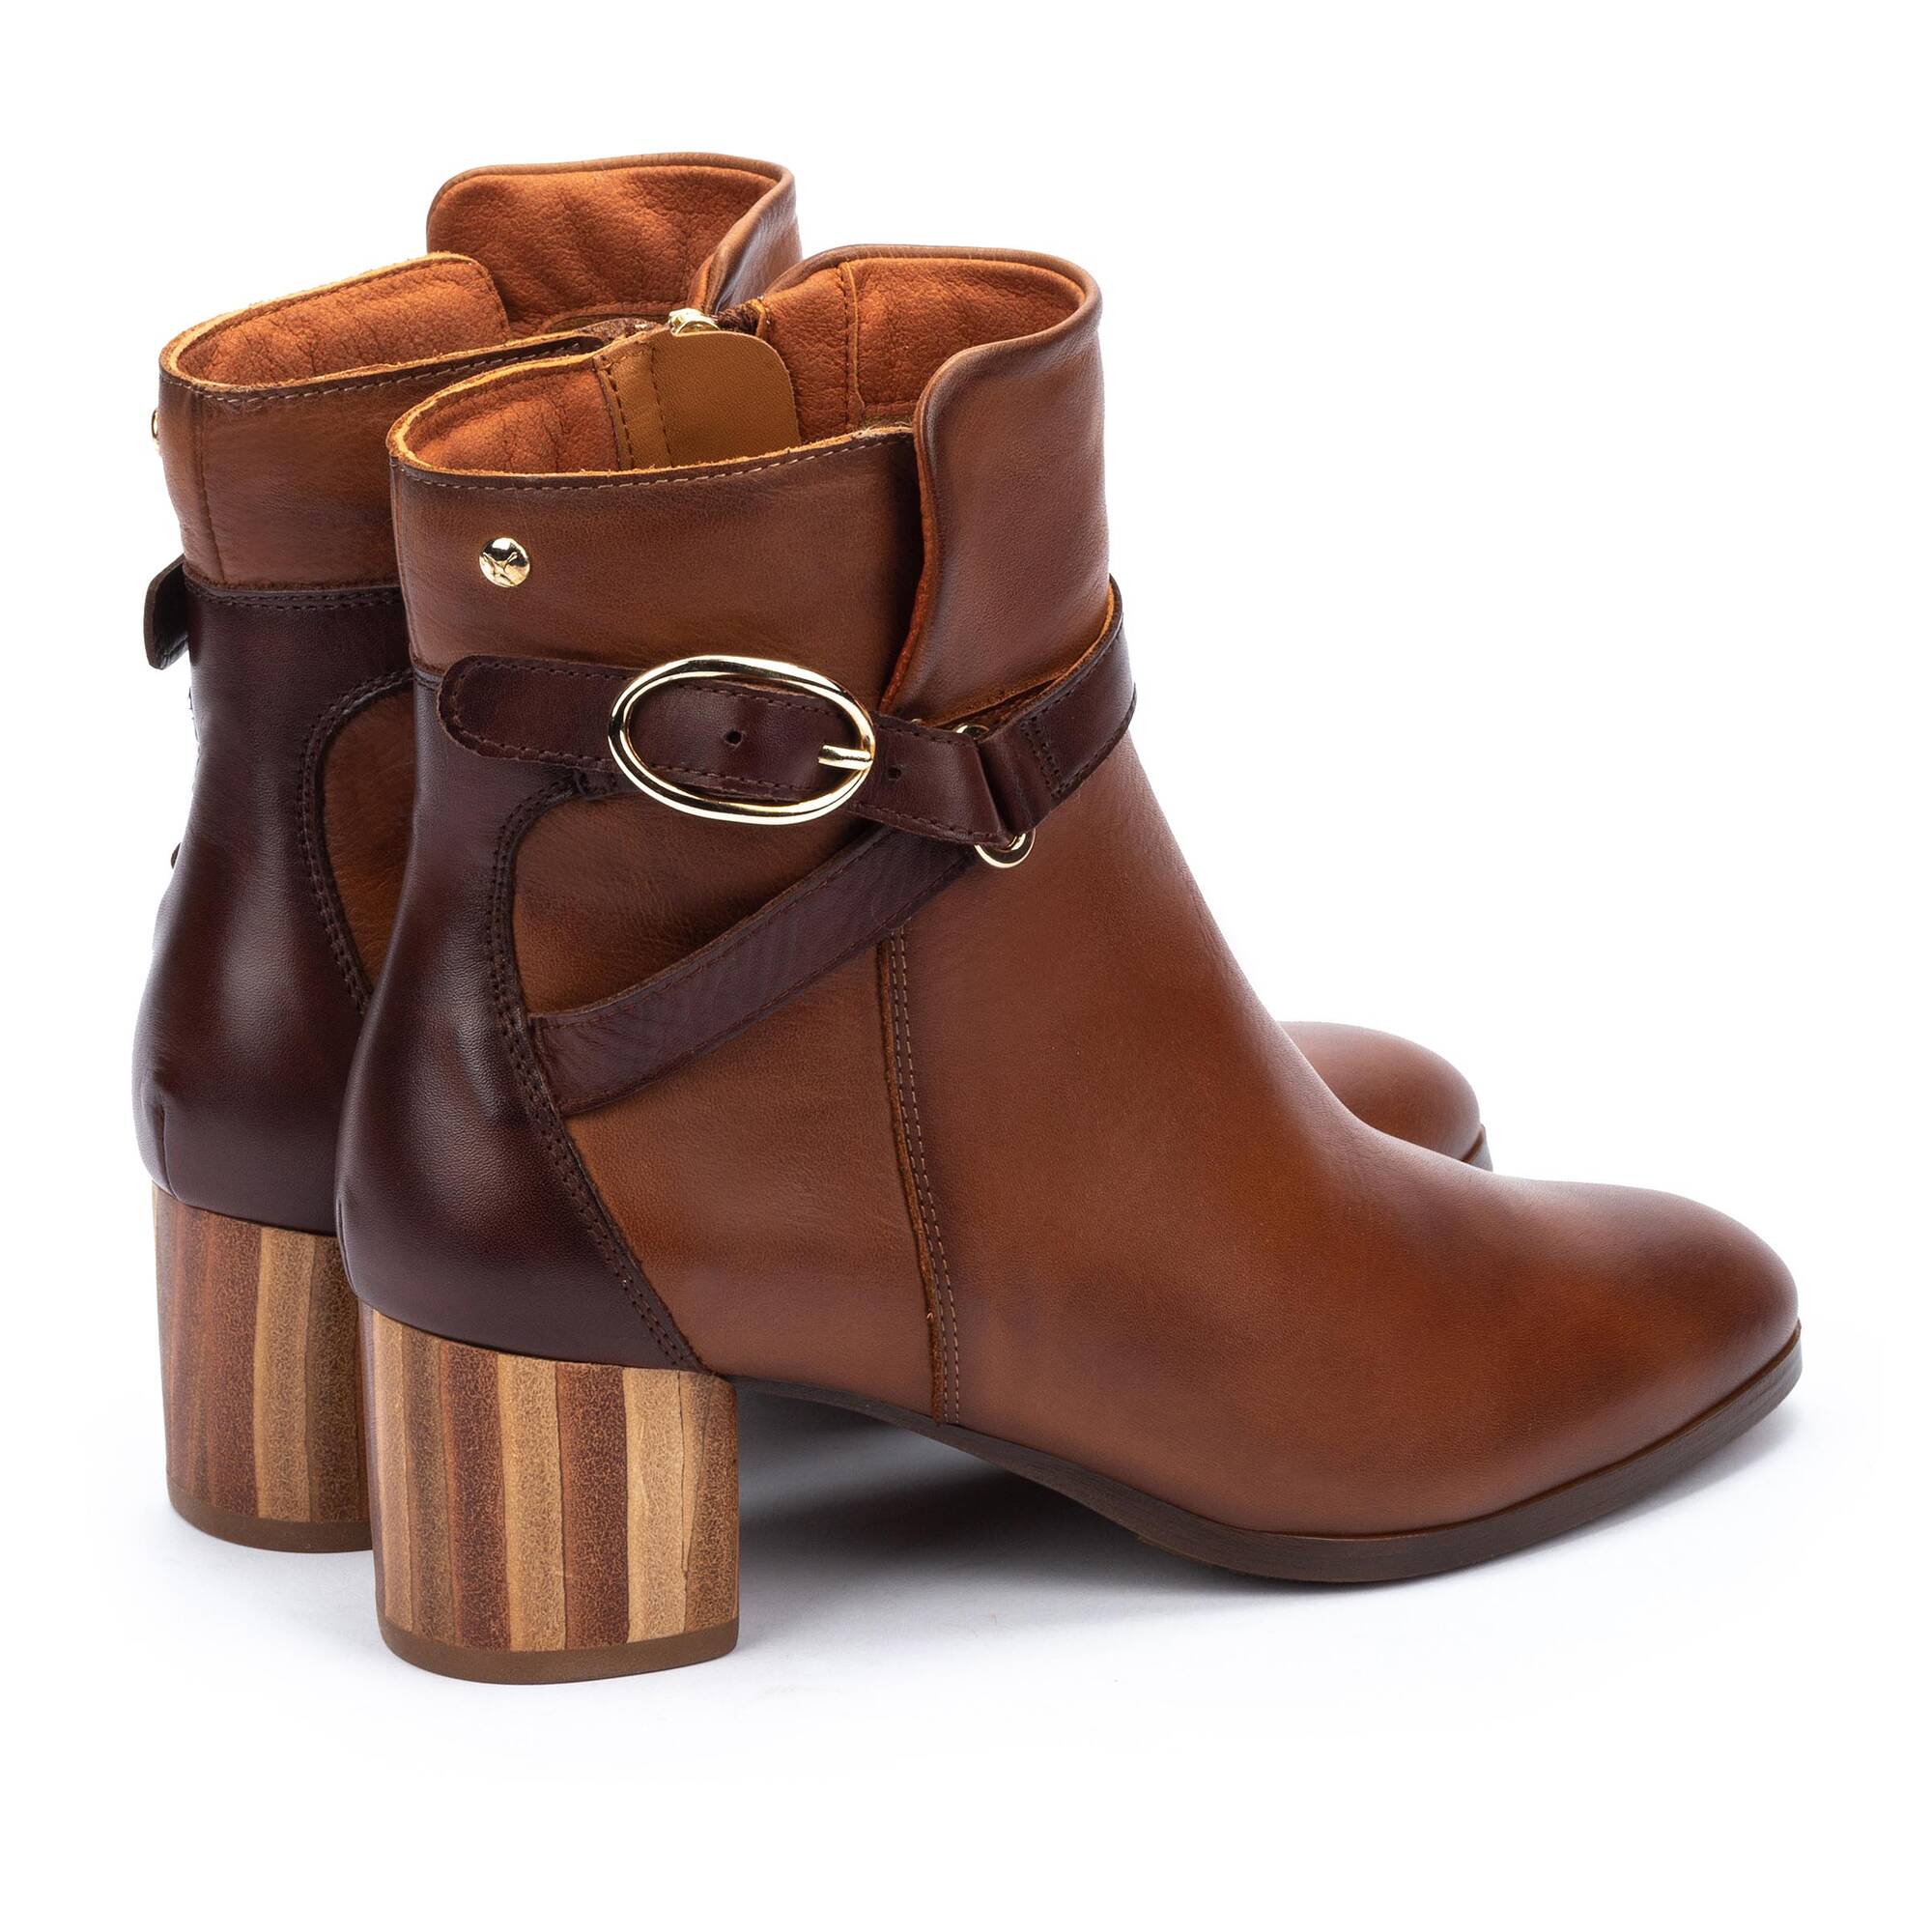 Women's Pikolinos Calafat Ankle Boots with Buckle